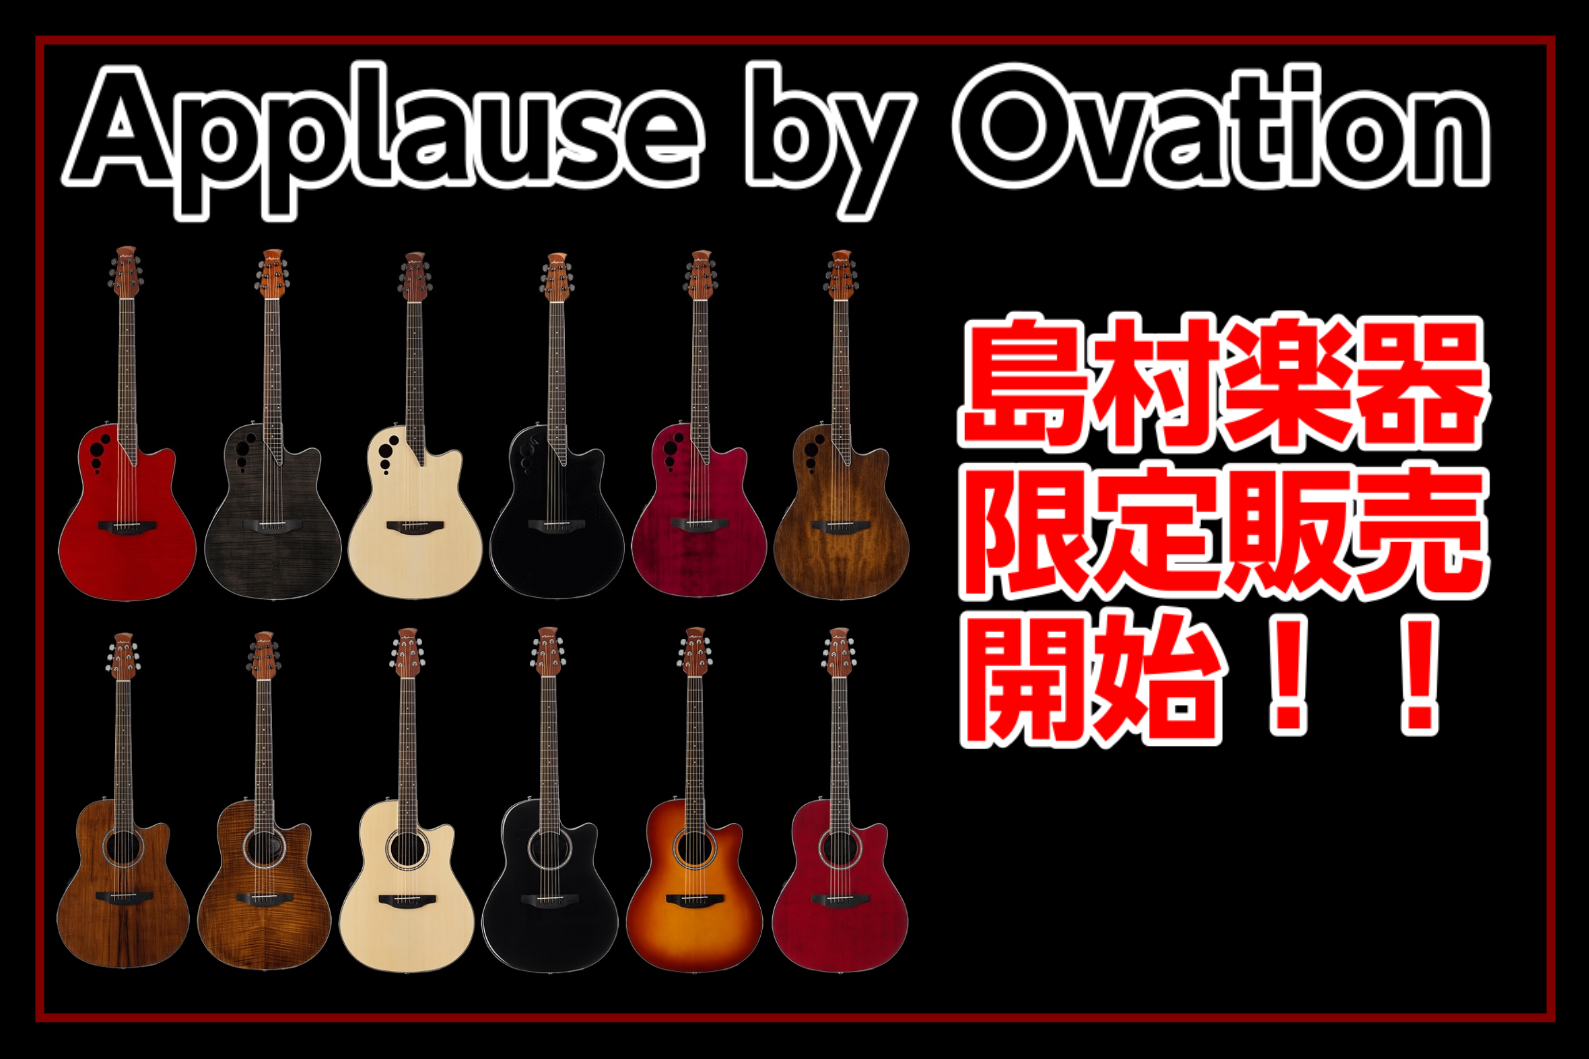 Applause(アプローズ) by Ovation 島村楽器限定販売開始！！